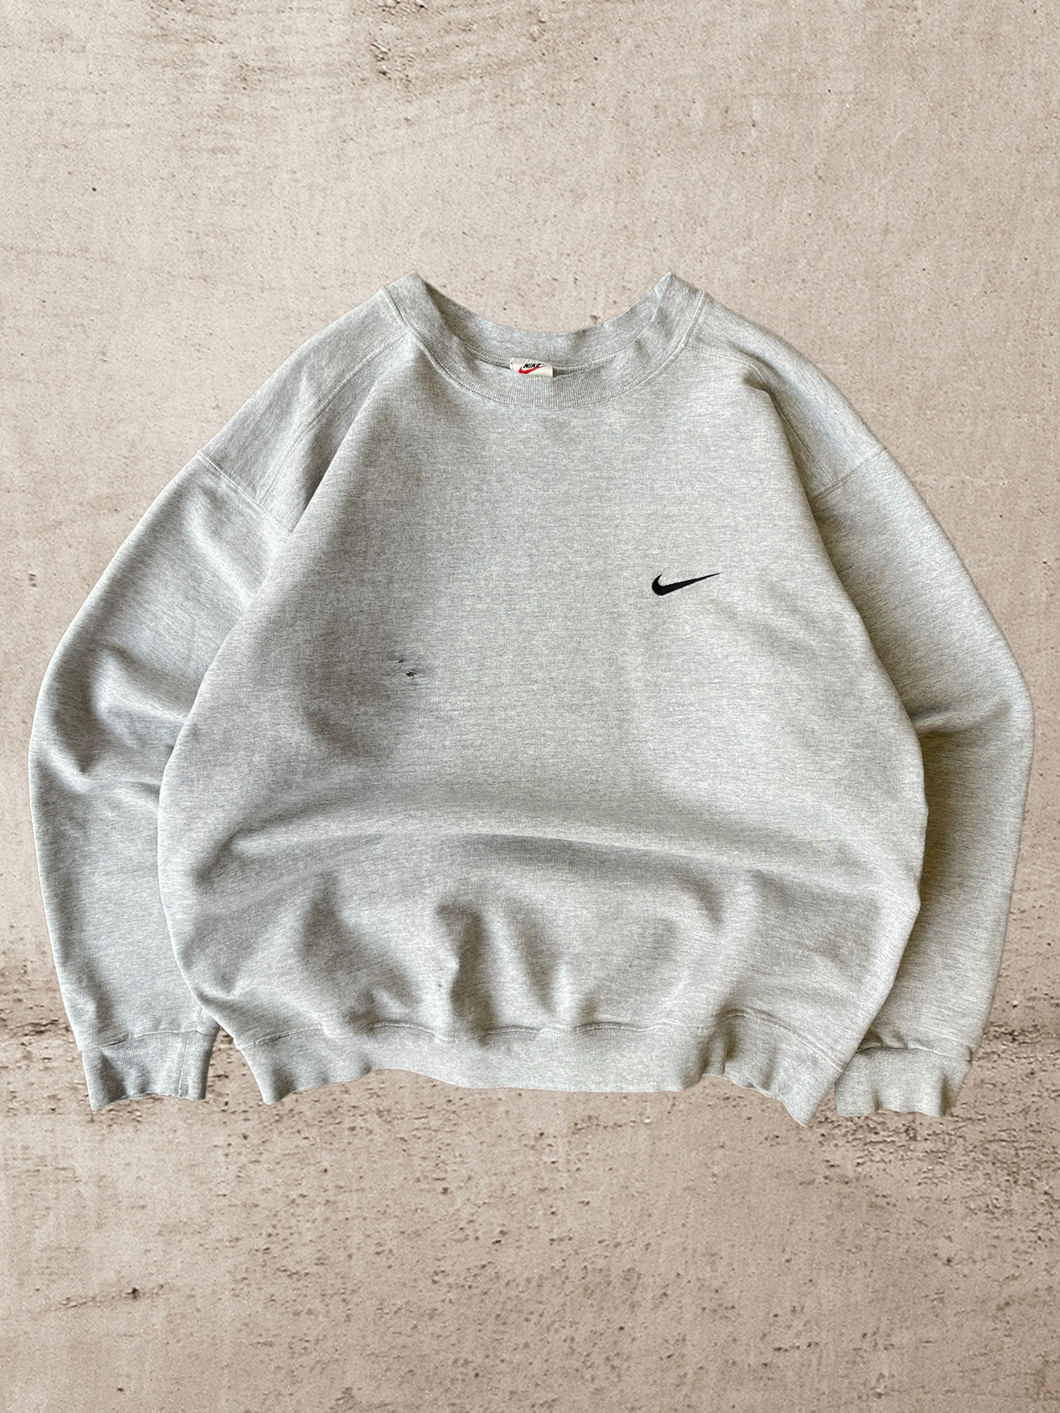 90s Nike Embroidered Crewneck - X-Large